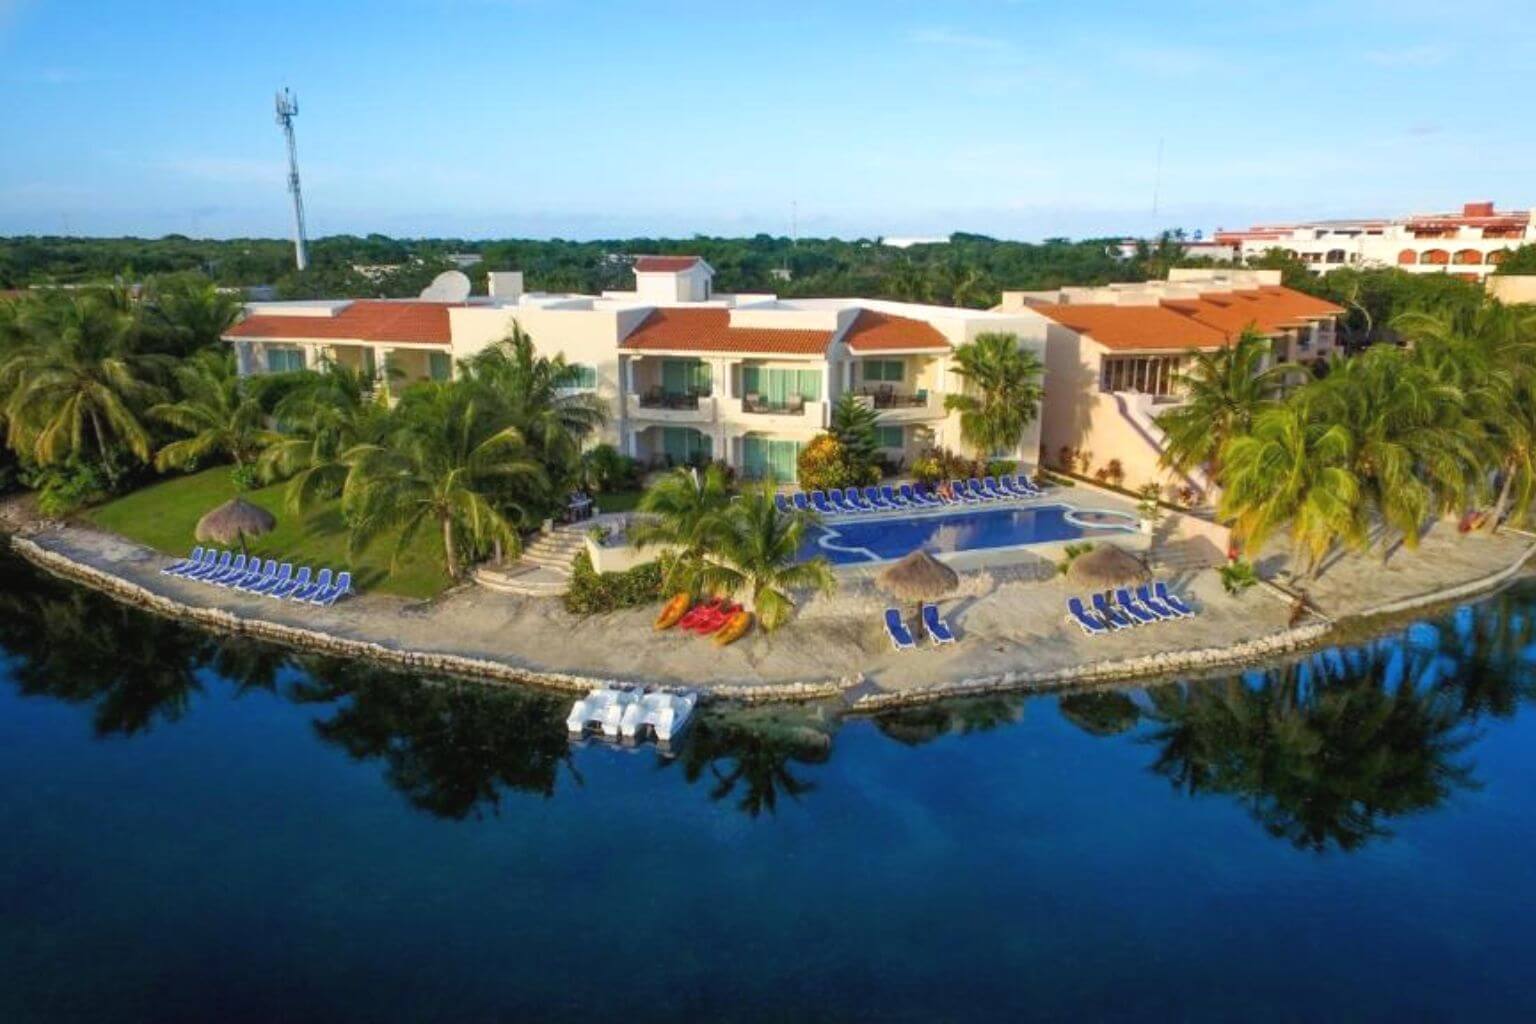 An airial view of Aventuras Club Lagoon, showing the rear of the property pool and beach.